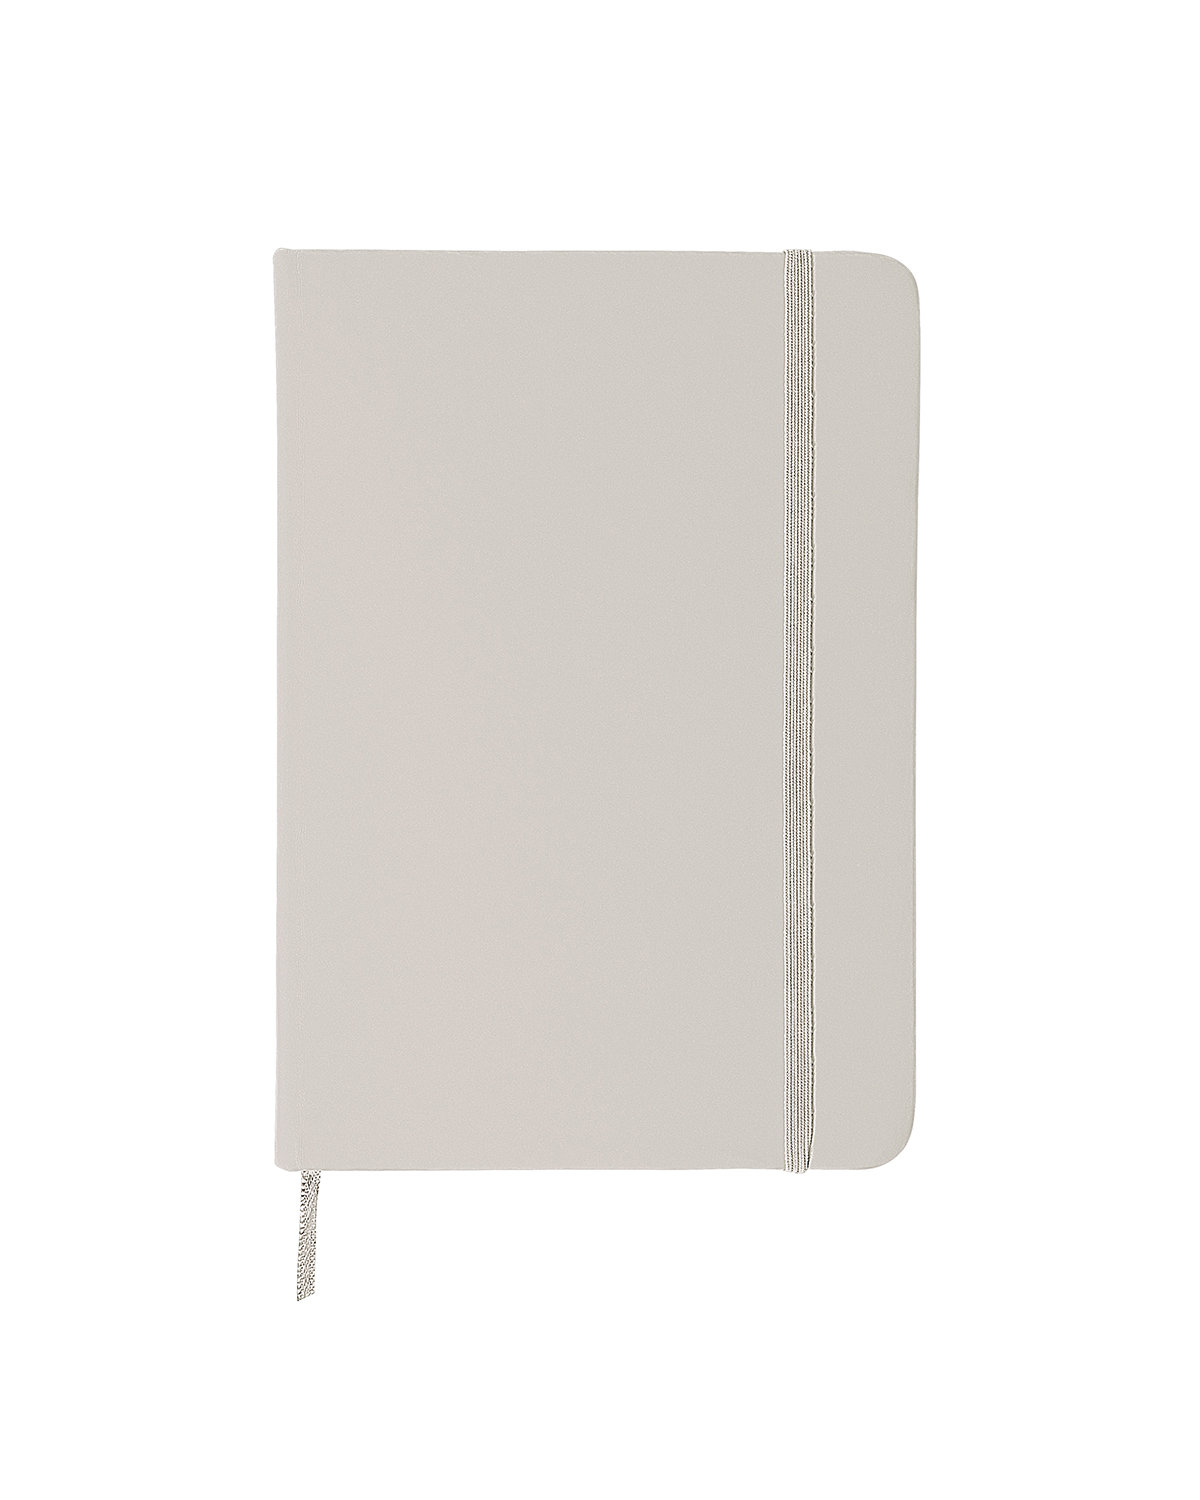 Prime Line Comfort Touch Bound Journal 5" X 7" white 